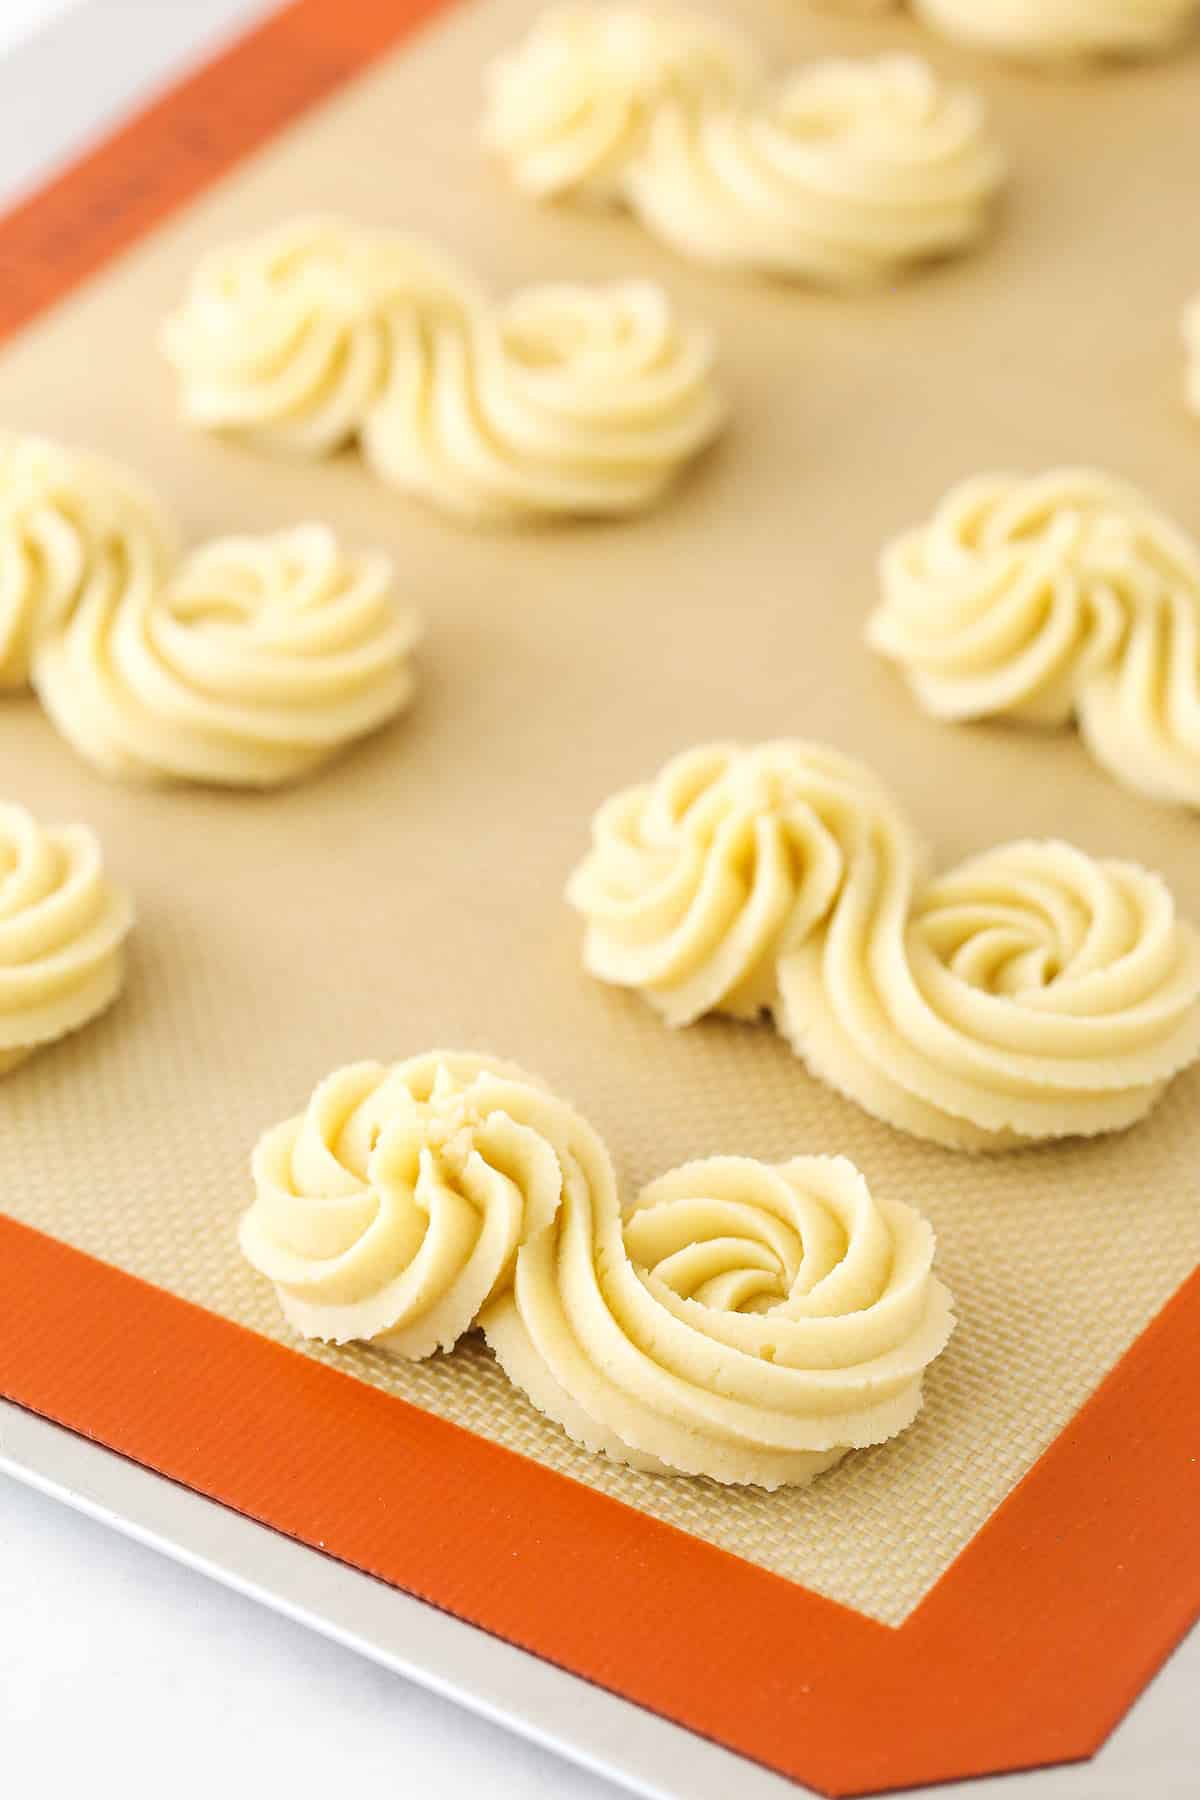 Piped spritz cookie dough in s-shapes on a silicone baking mat.